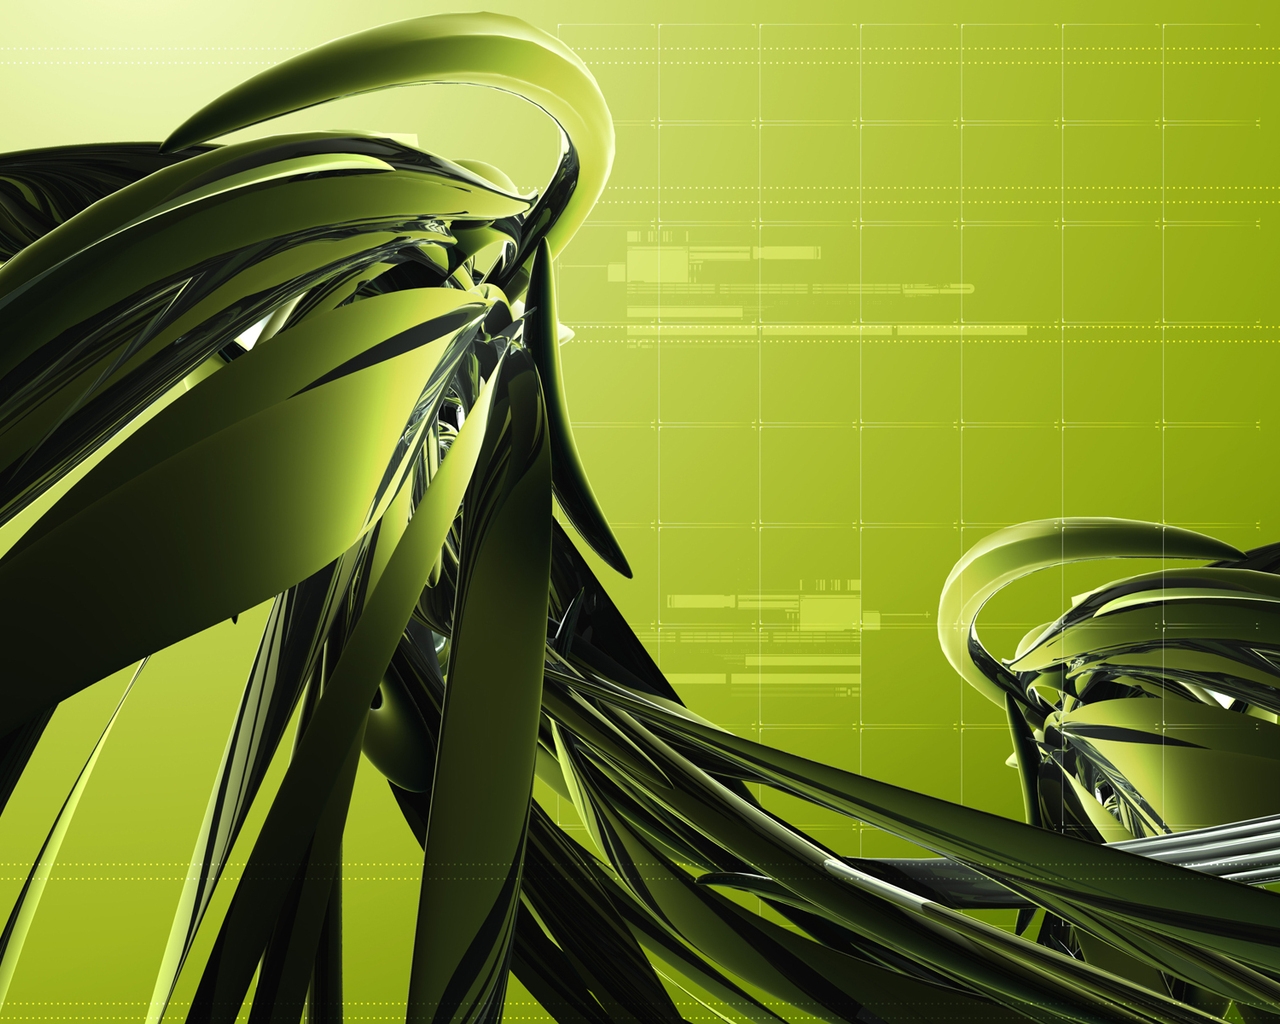 Dark Green Abstract Design for 1280 x 1024 resolution